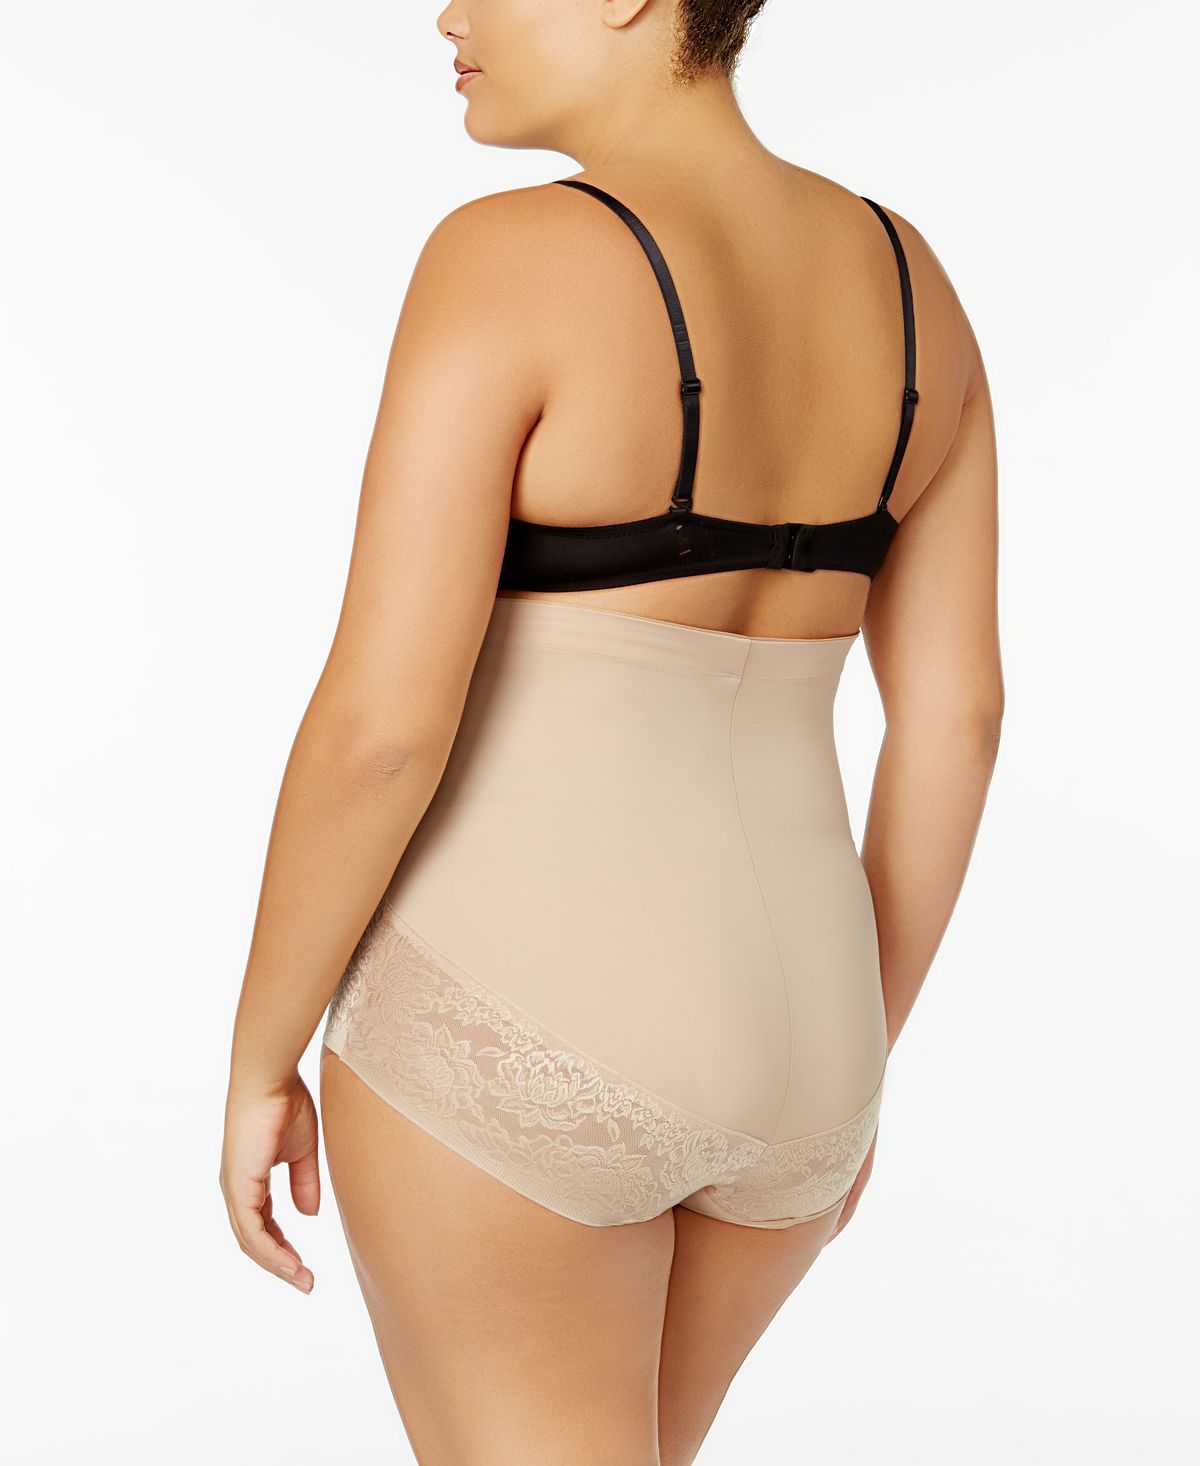 Maidenform Firm Foundations Plus Size Firm Control High Waist